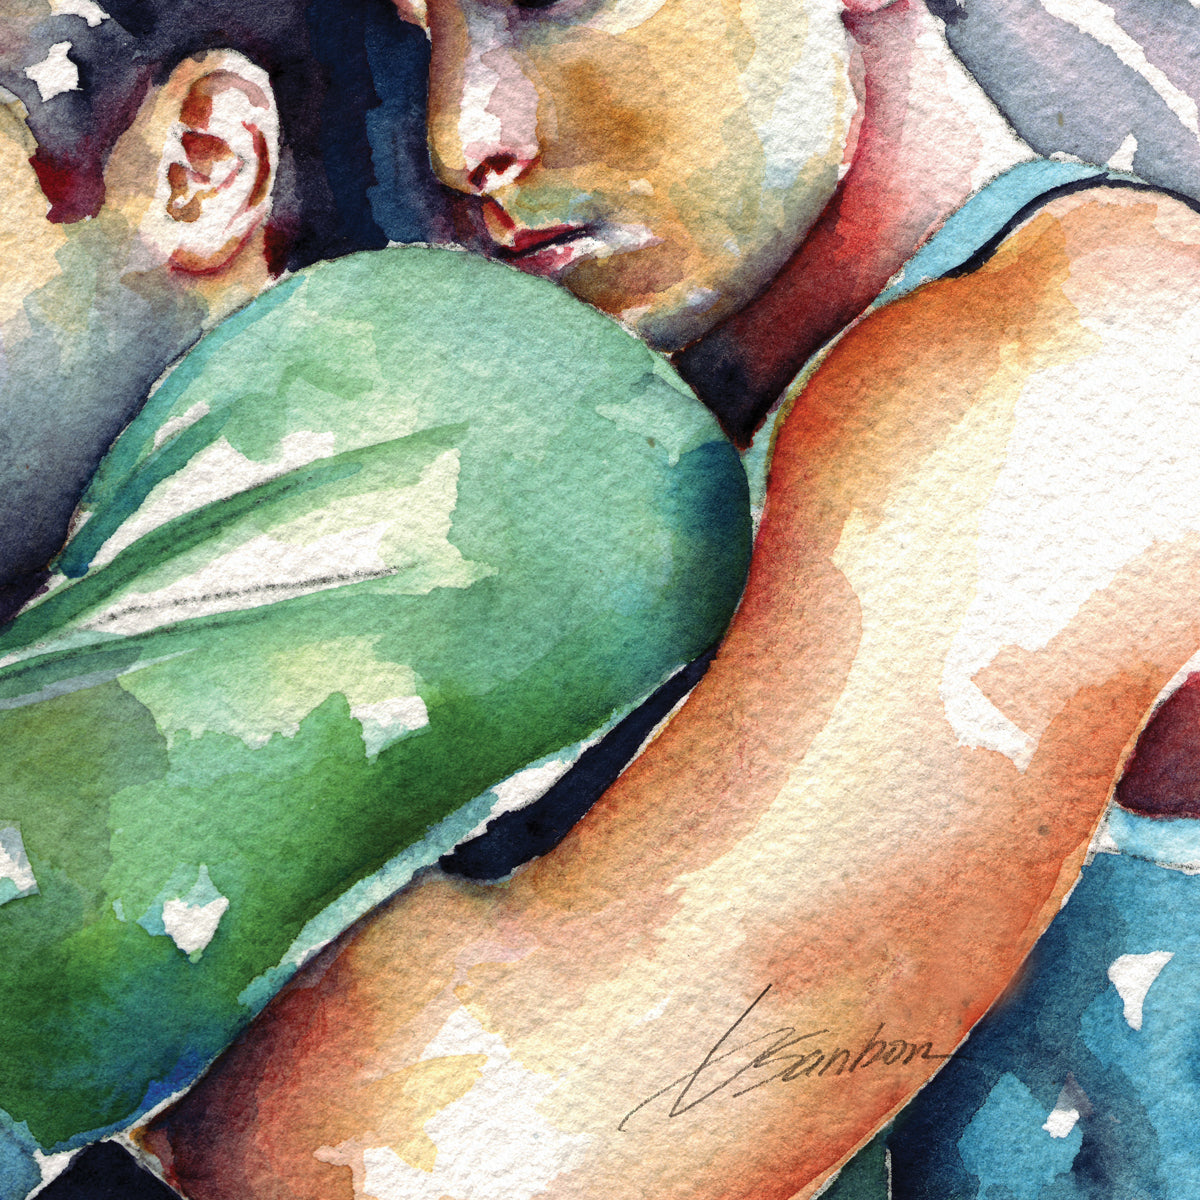 Two Men Sleeping: Intimate Embrace & Tranquil Rest - Giclee Art Print